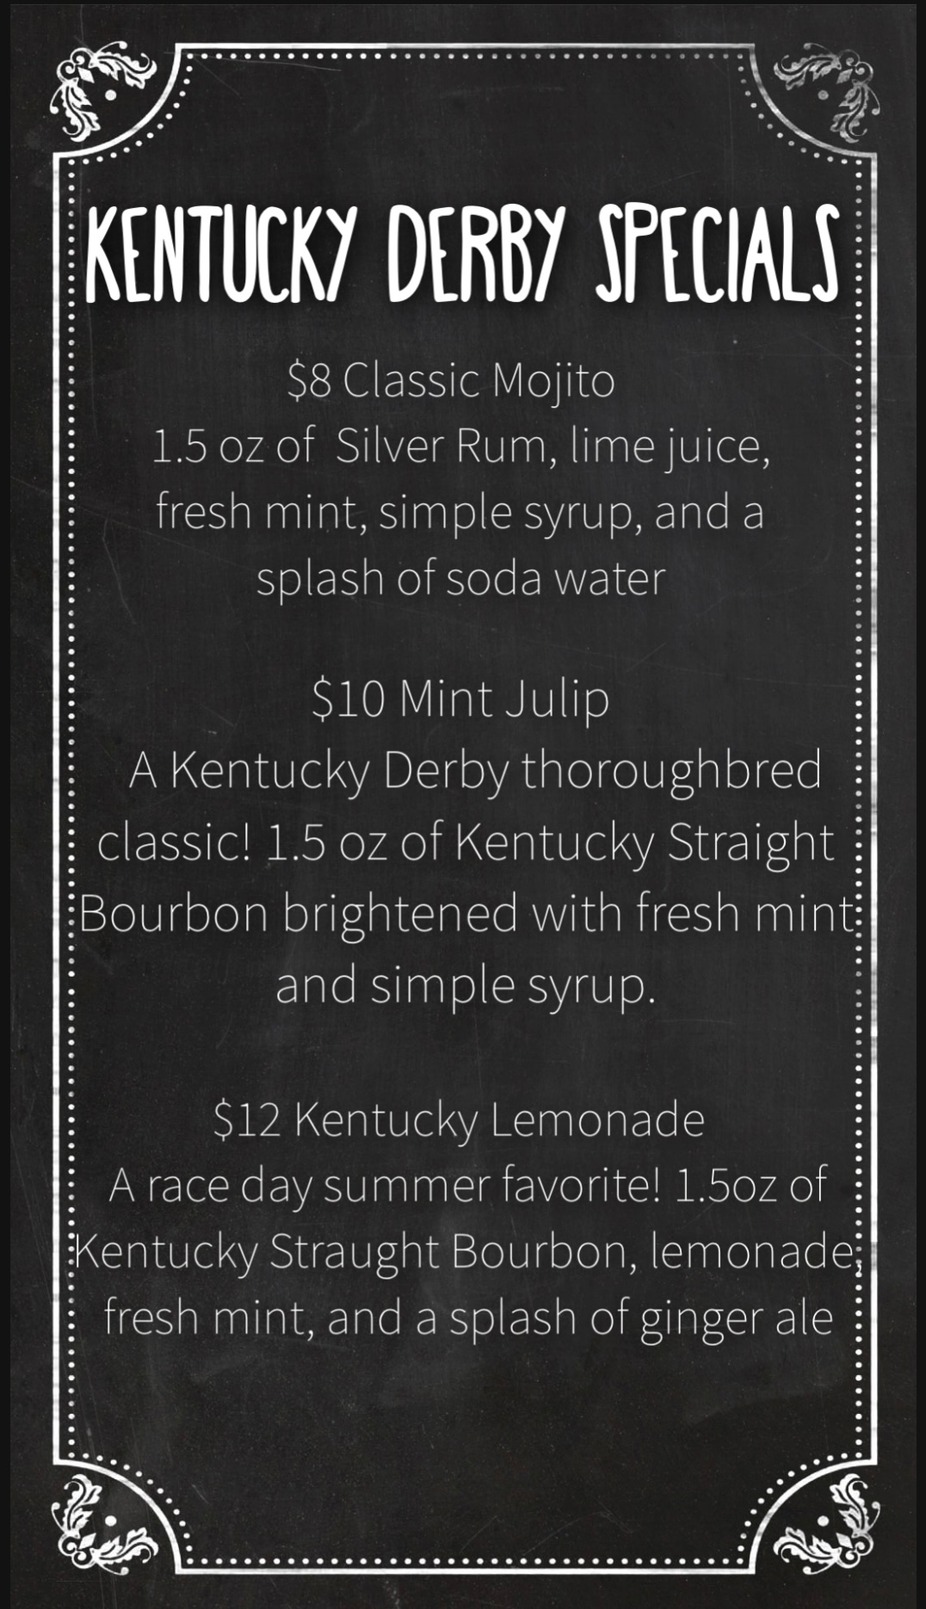 Kentucky Derby! Saturday May 4th event photo